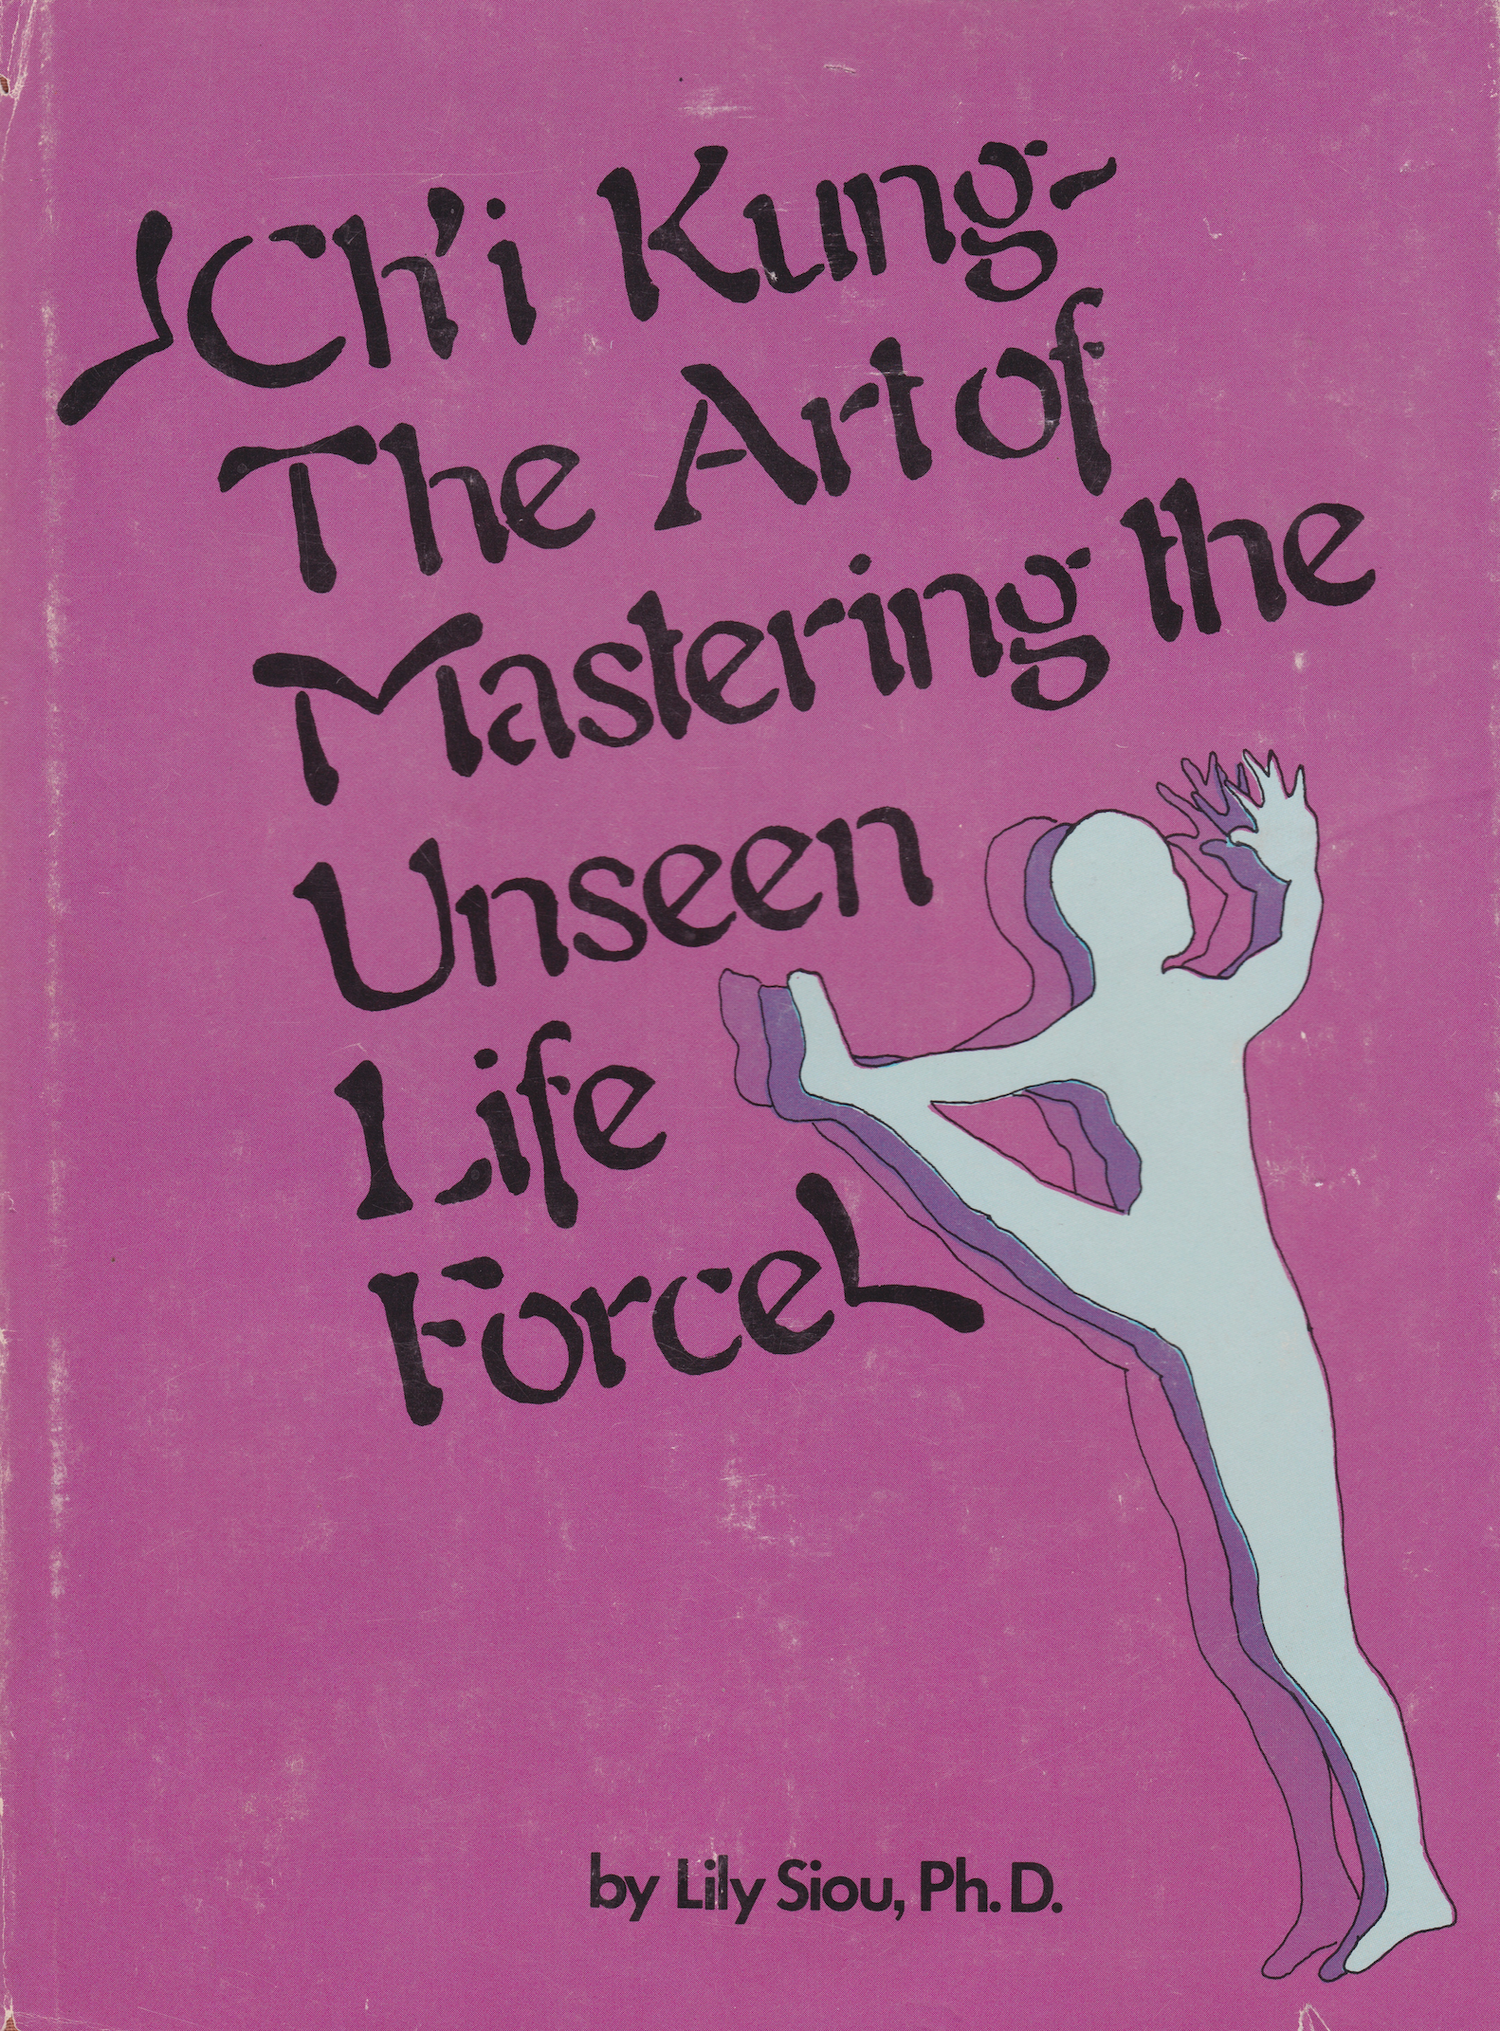 Chi Kung the Art of Mastering the Unseen Life Force Book by Lily Siou (Hardcover) (Preowned)